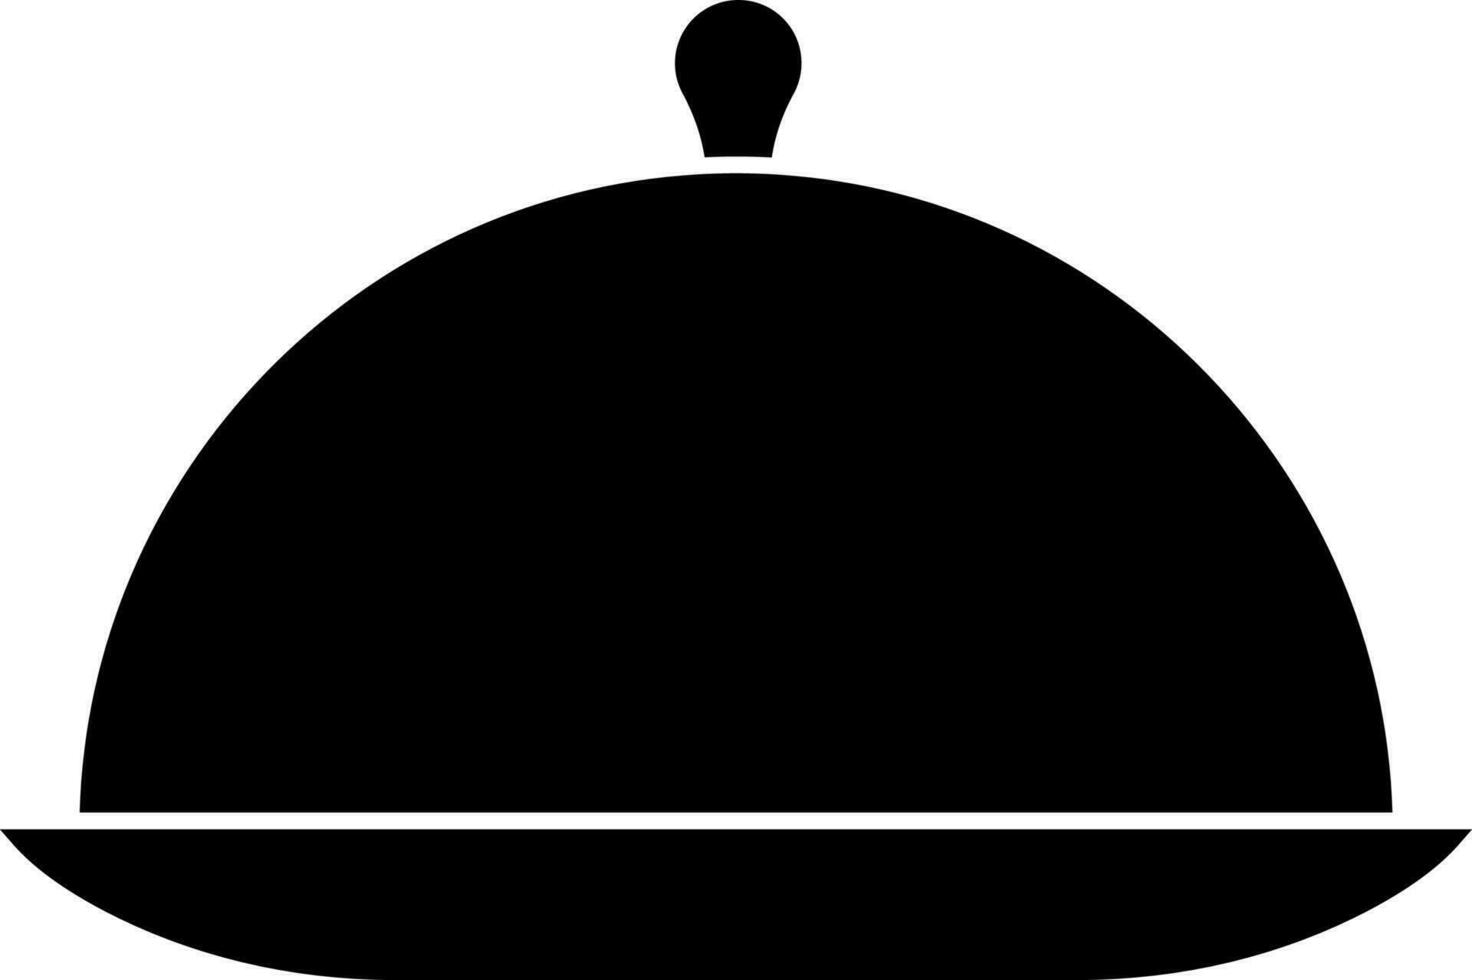 Serving dish or cloche icon in flat style. vector